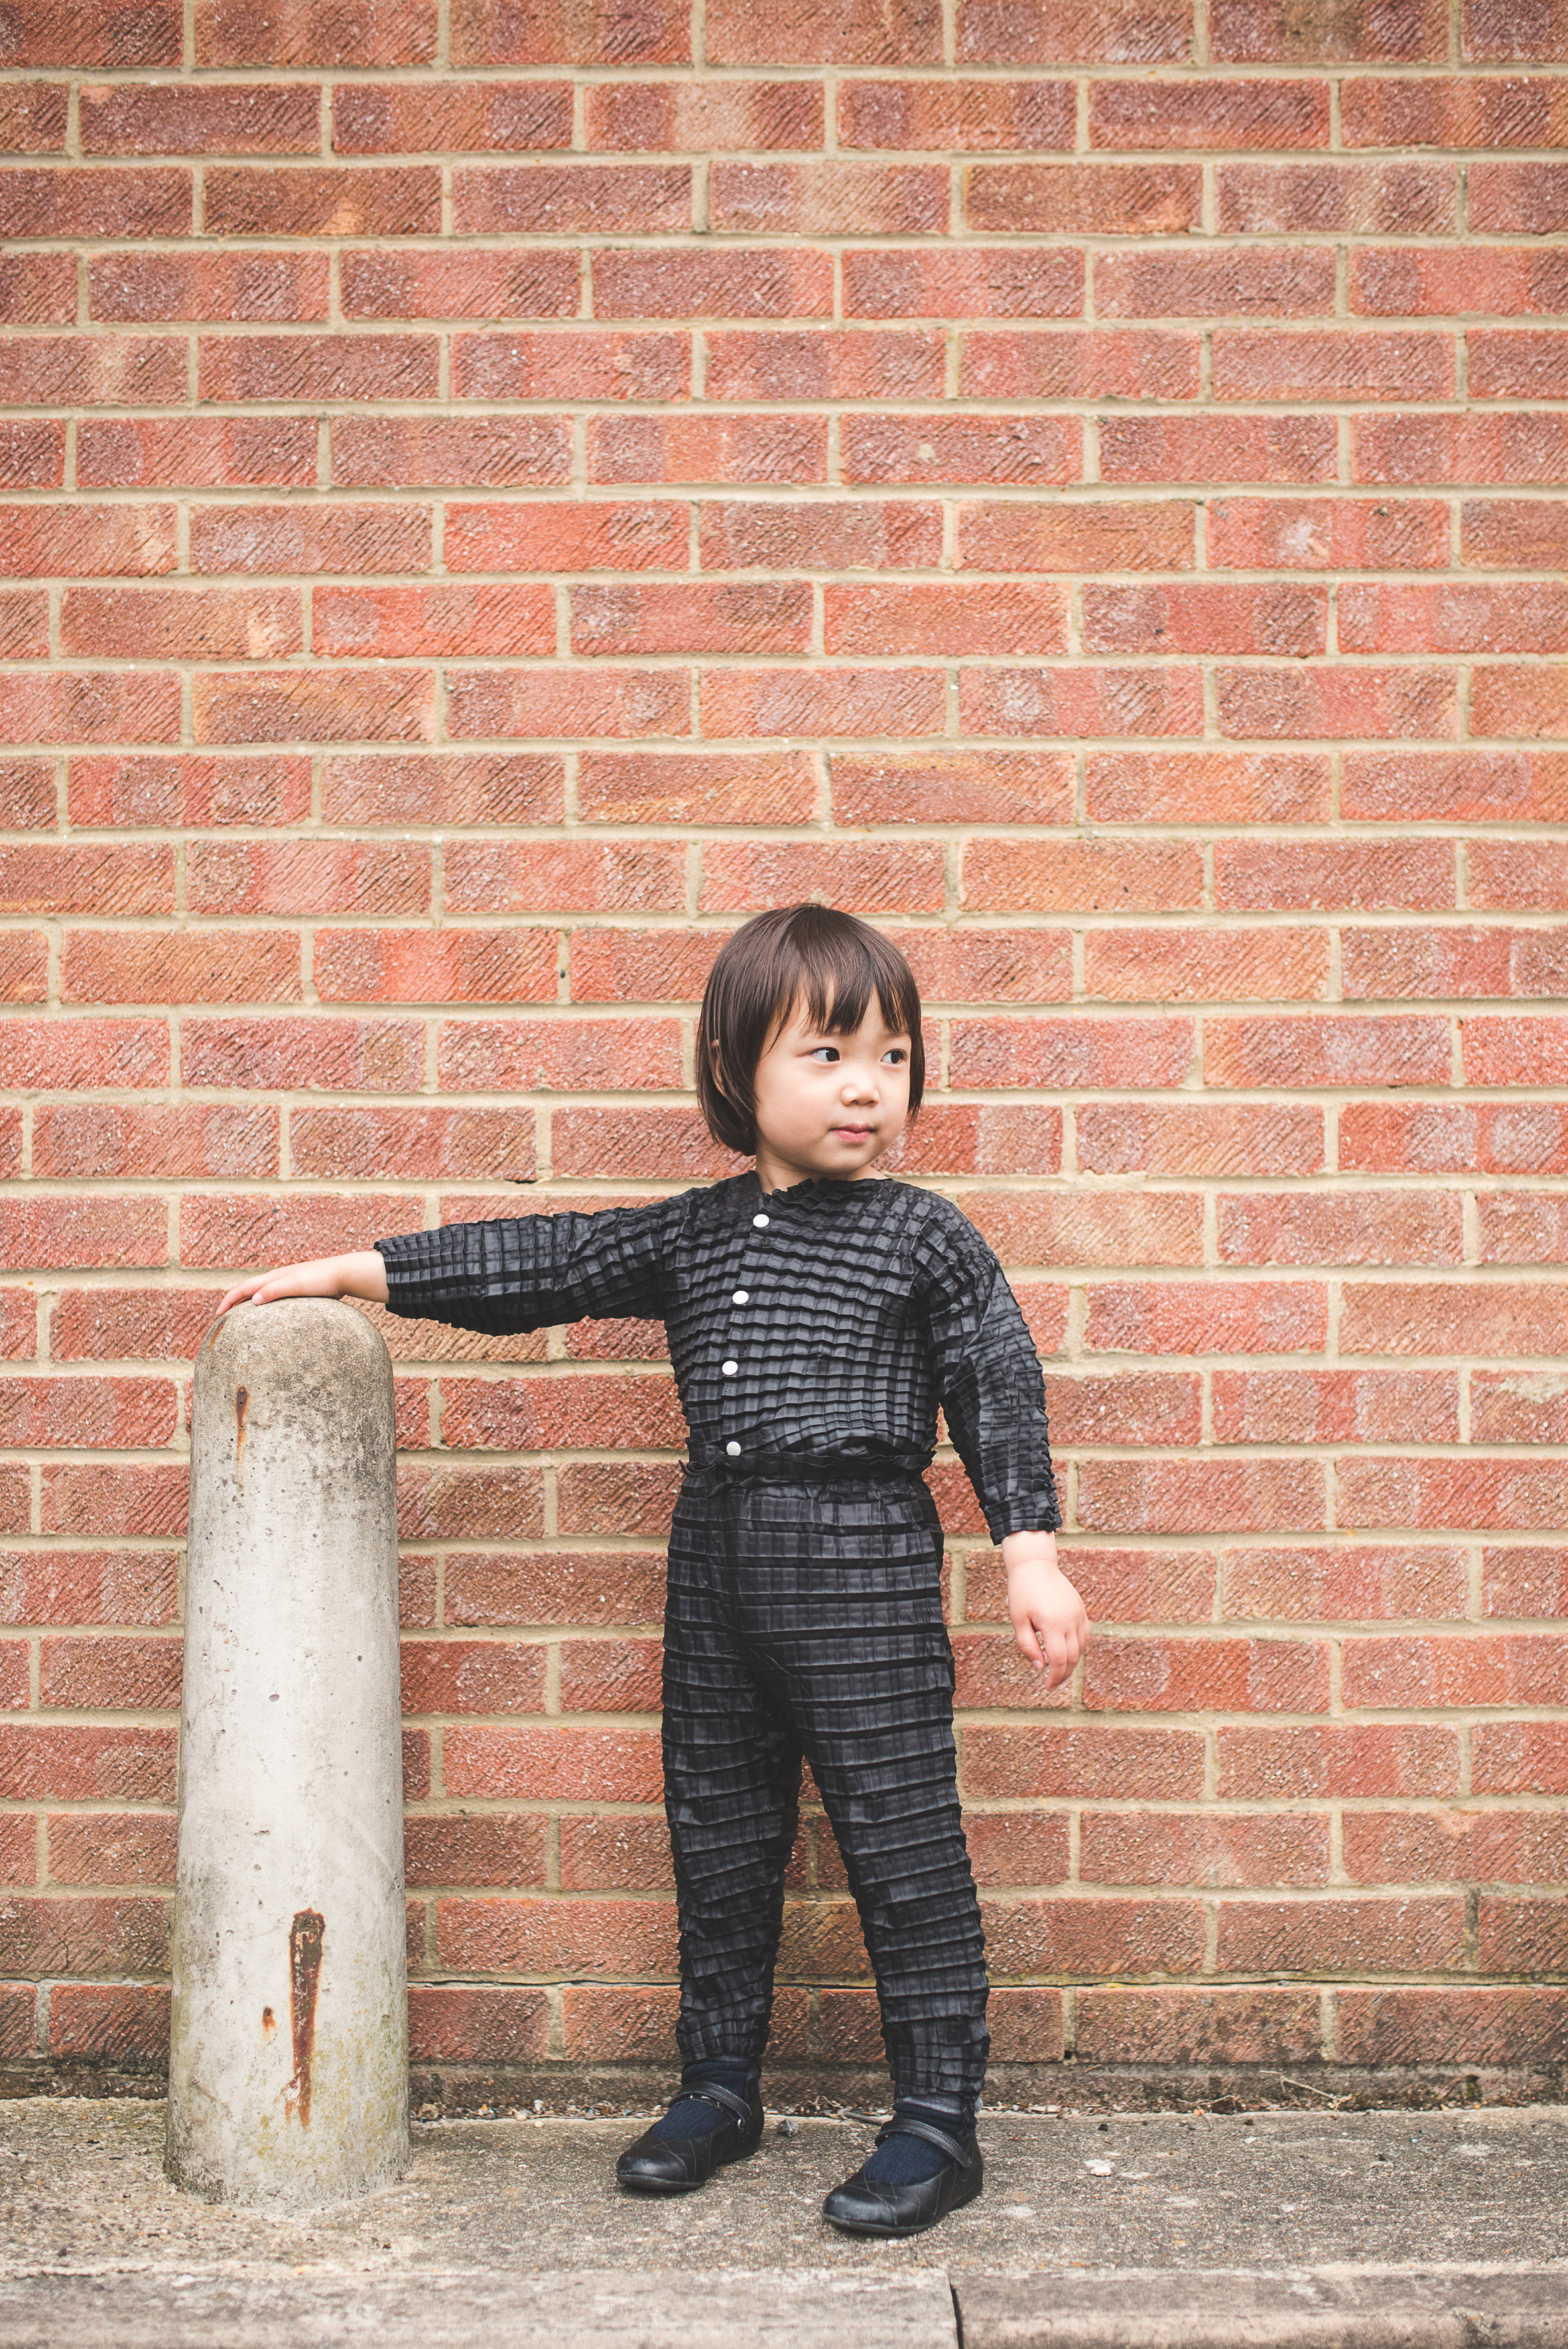 Petit Pli clothing expands to fit children as they grow